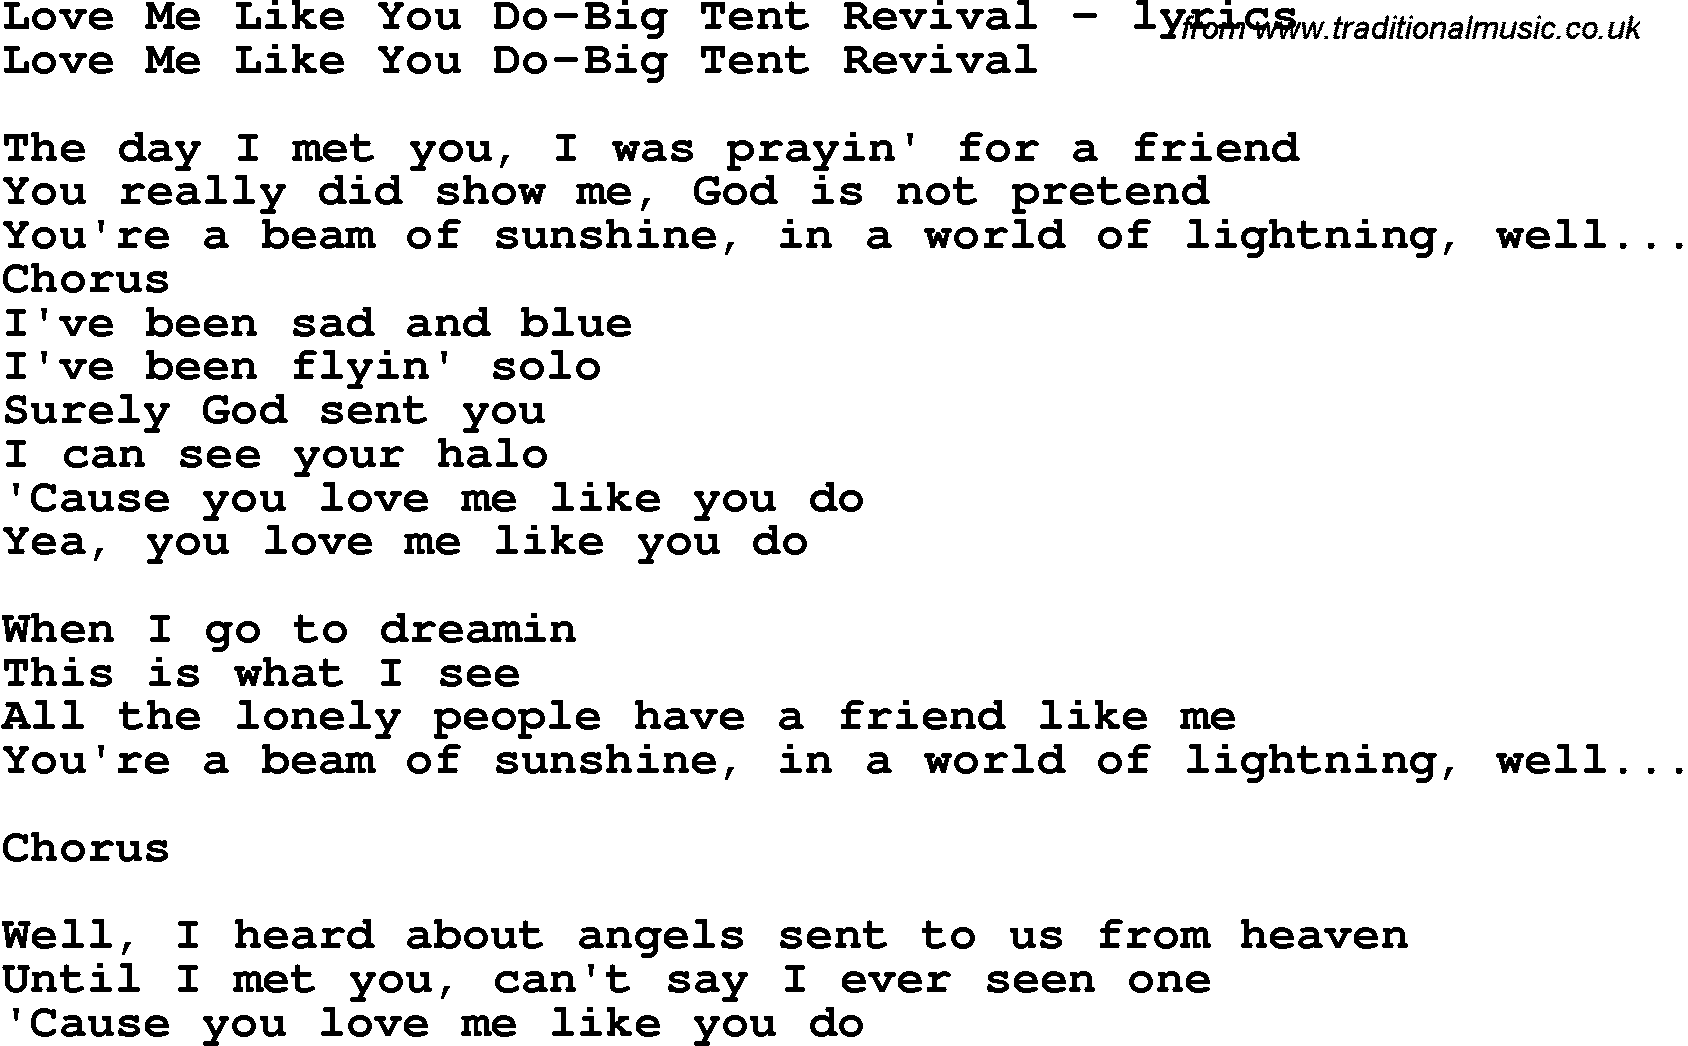 Love Song Lyrics for: Love Me Like You Do-Big Tent Revival